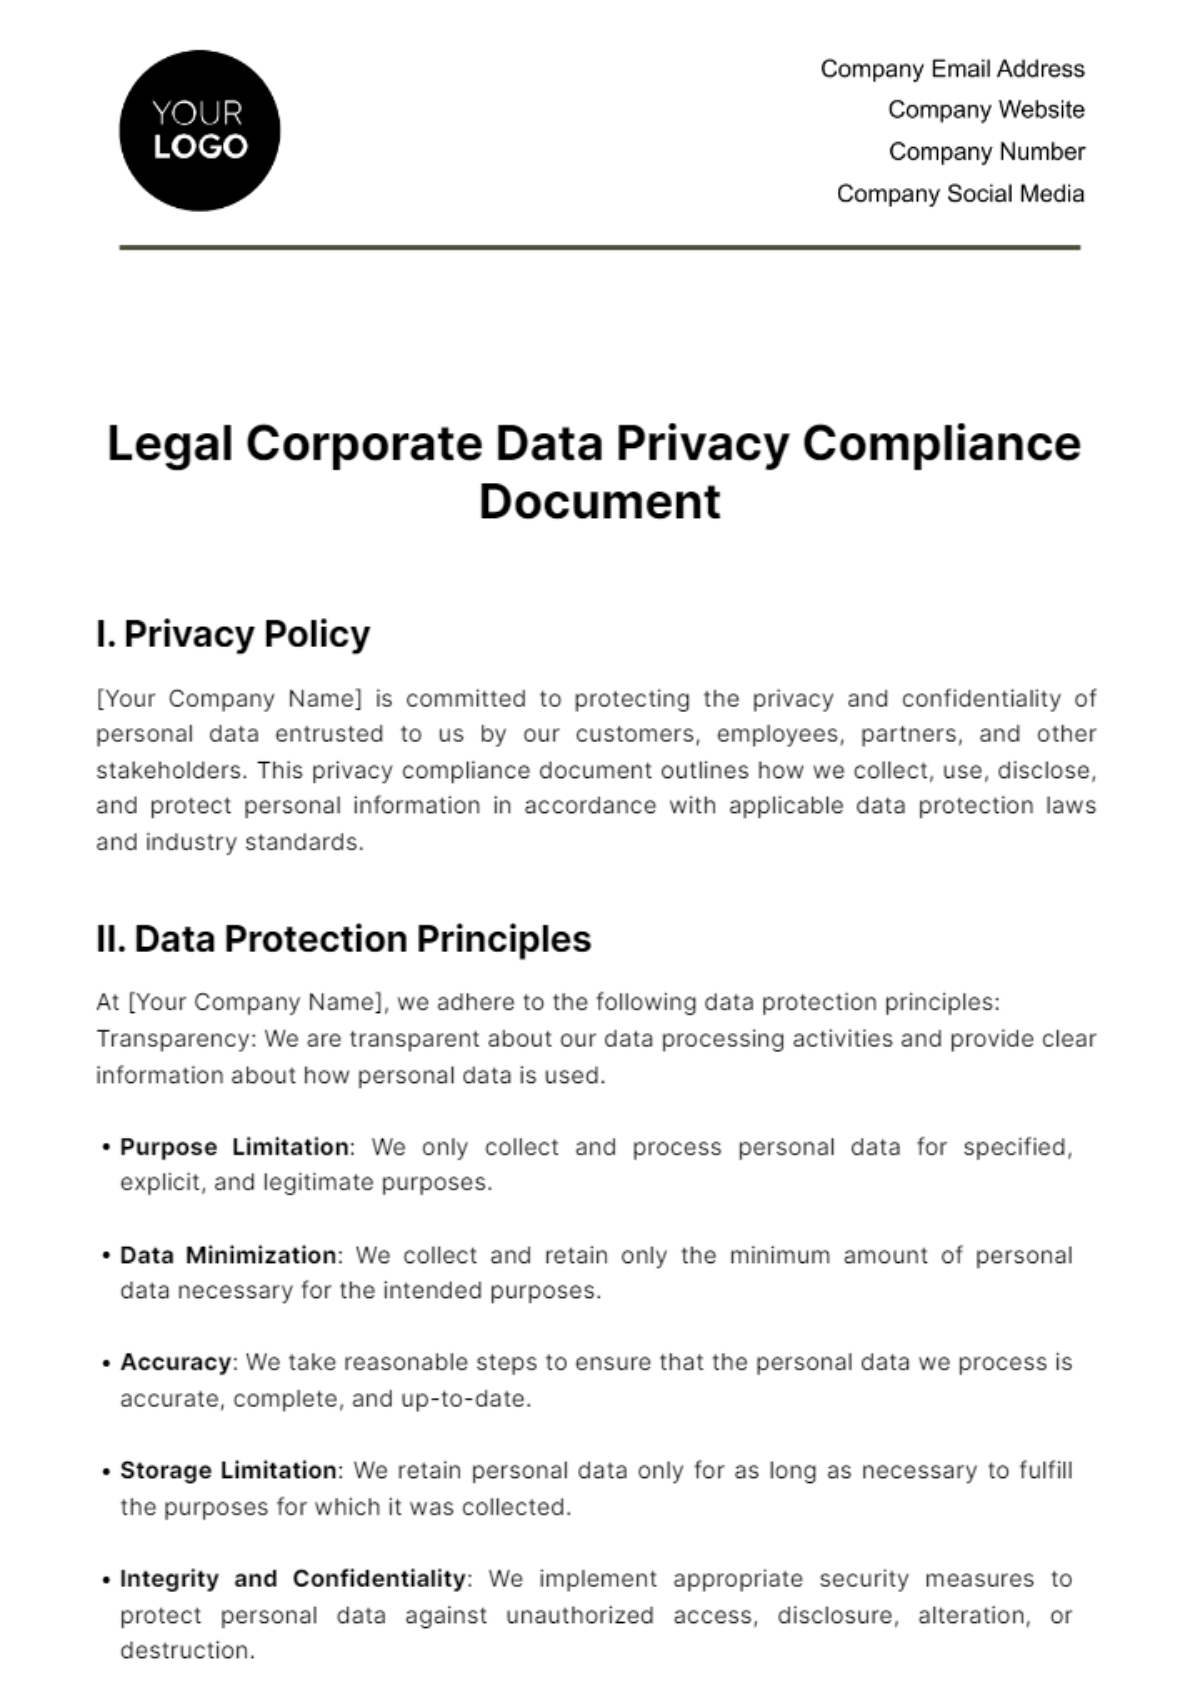 Free Legal Corporate Data Privacy Compliance Document Template